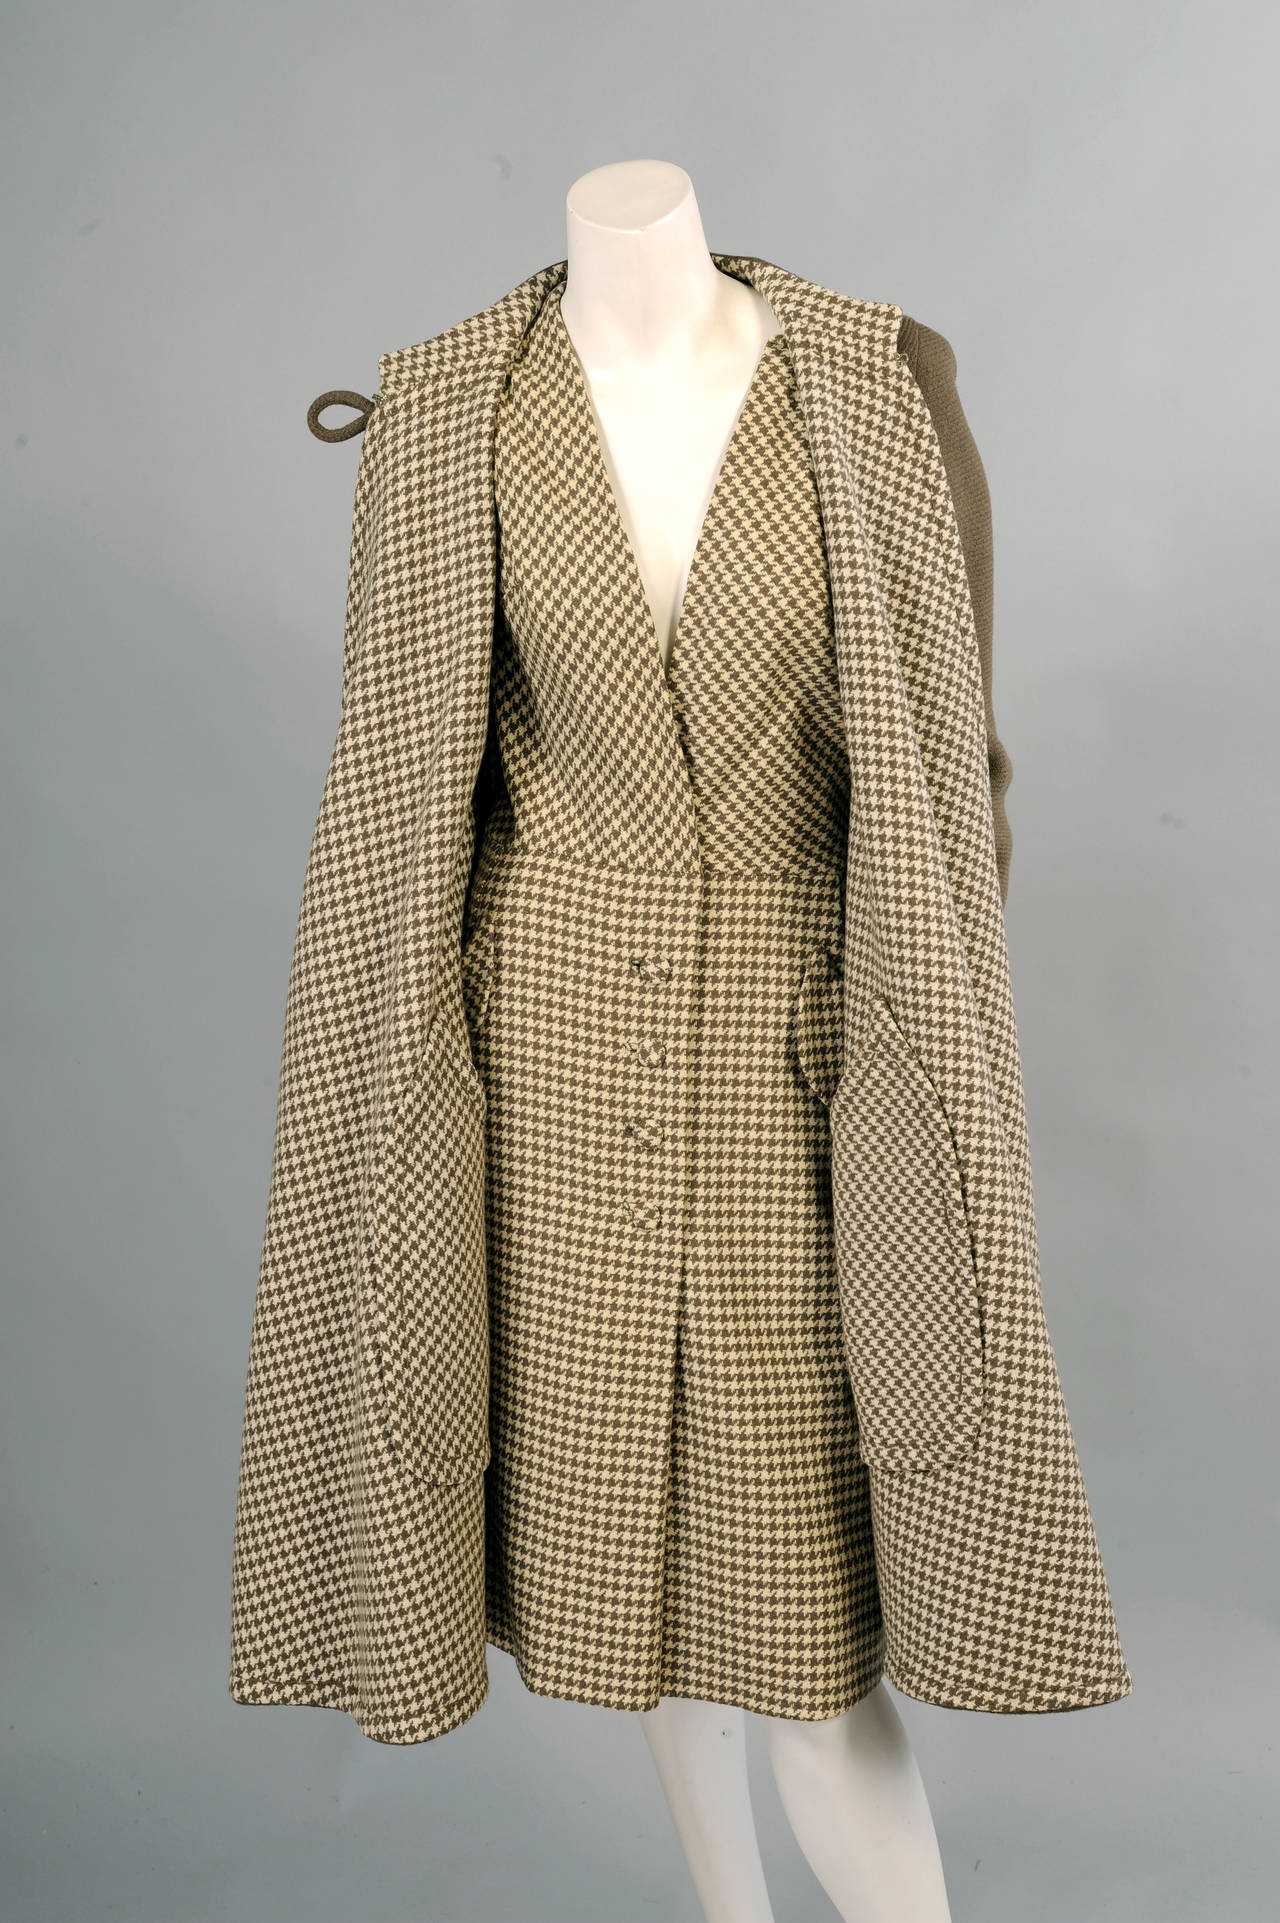 Gray Sybil Connolly Olive Green Reversible Irish Wool Coat and Matching Dress